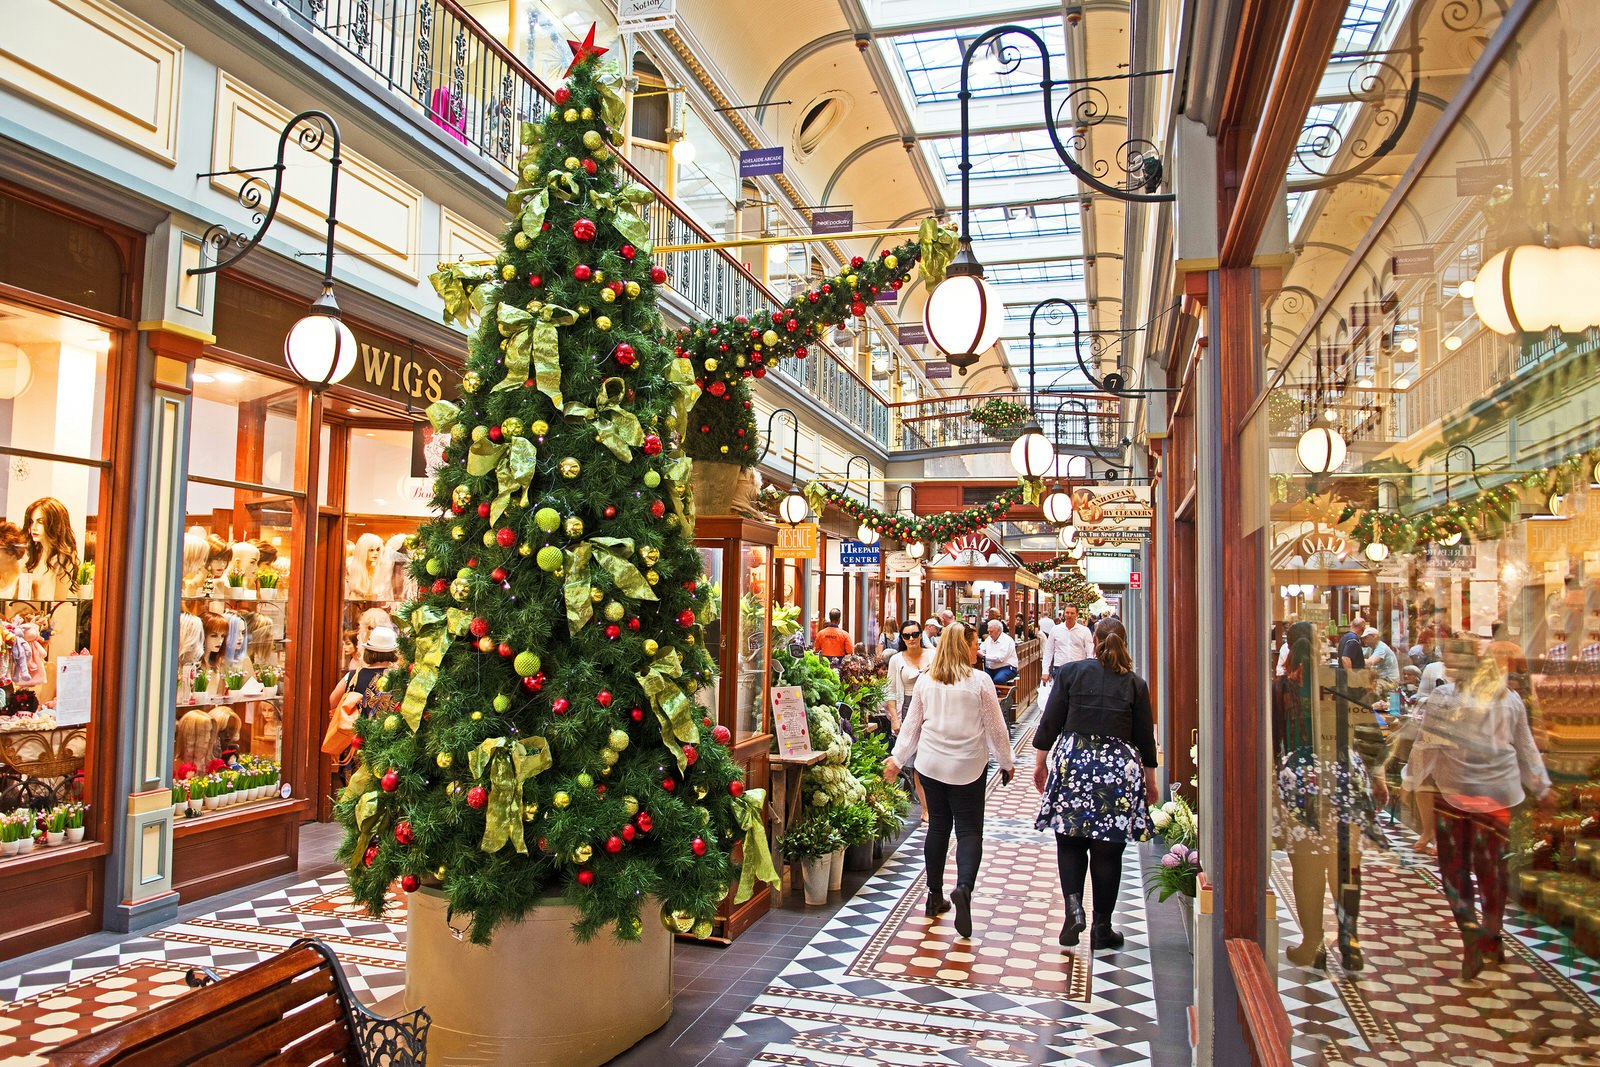 Shoppers stroll past Christmas decorations in the Adelaide Arcade, an old-fashioned, covered arcade with black-and-white tiled floor